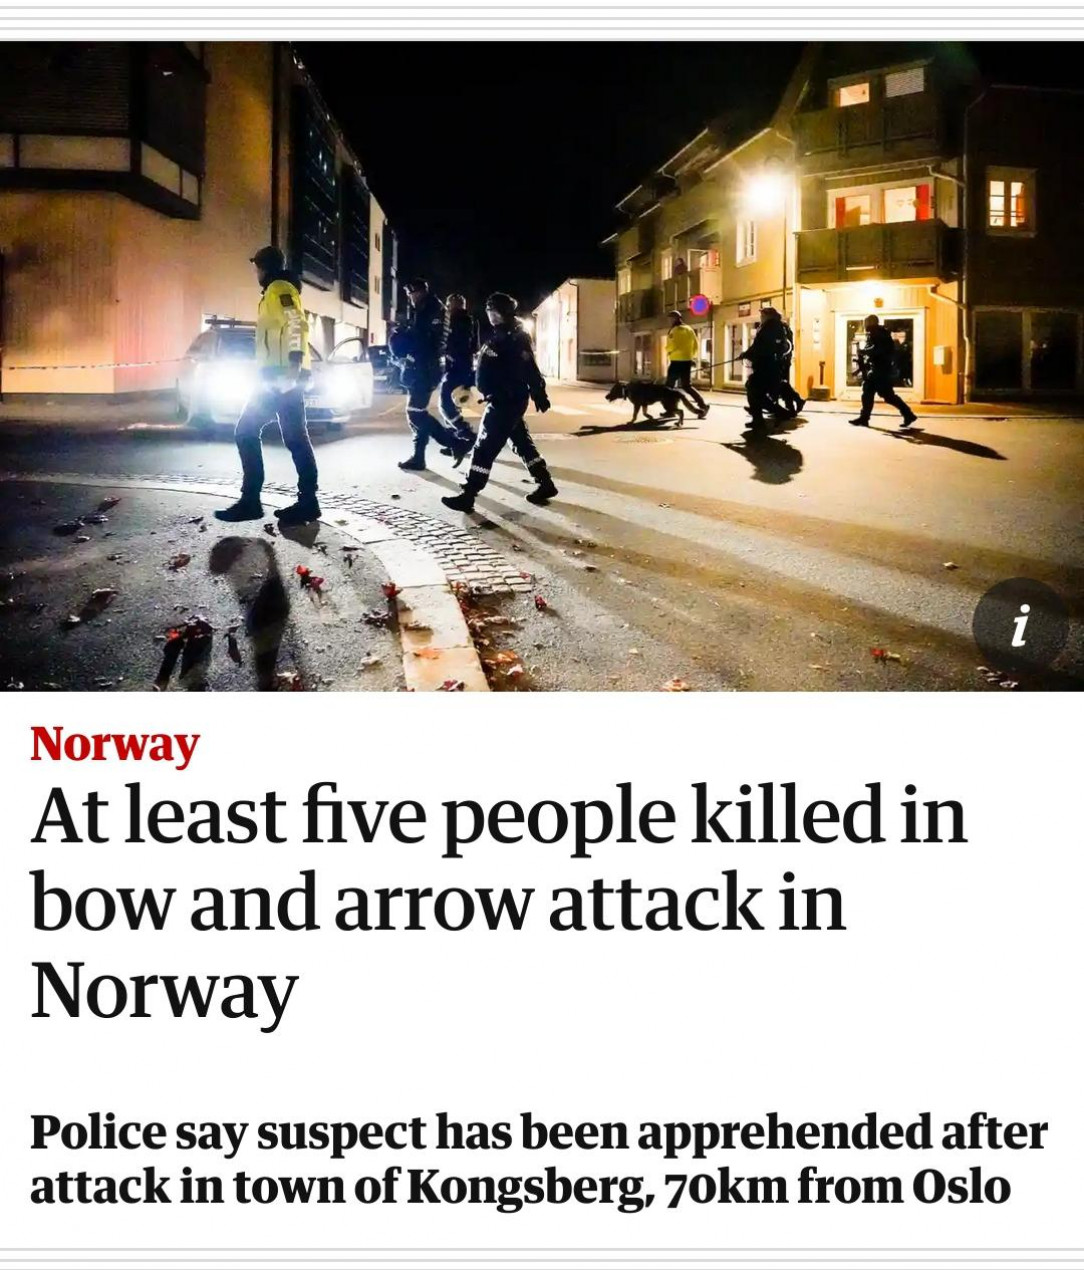 POS kills 5 people with bow and arrow